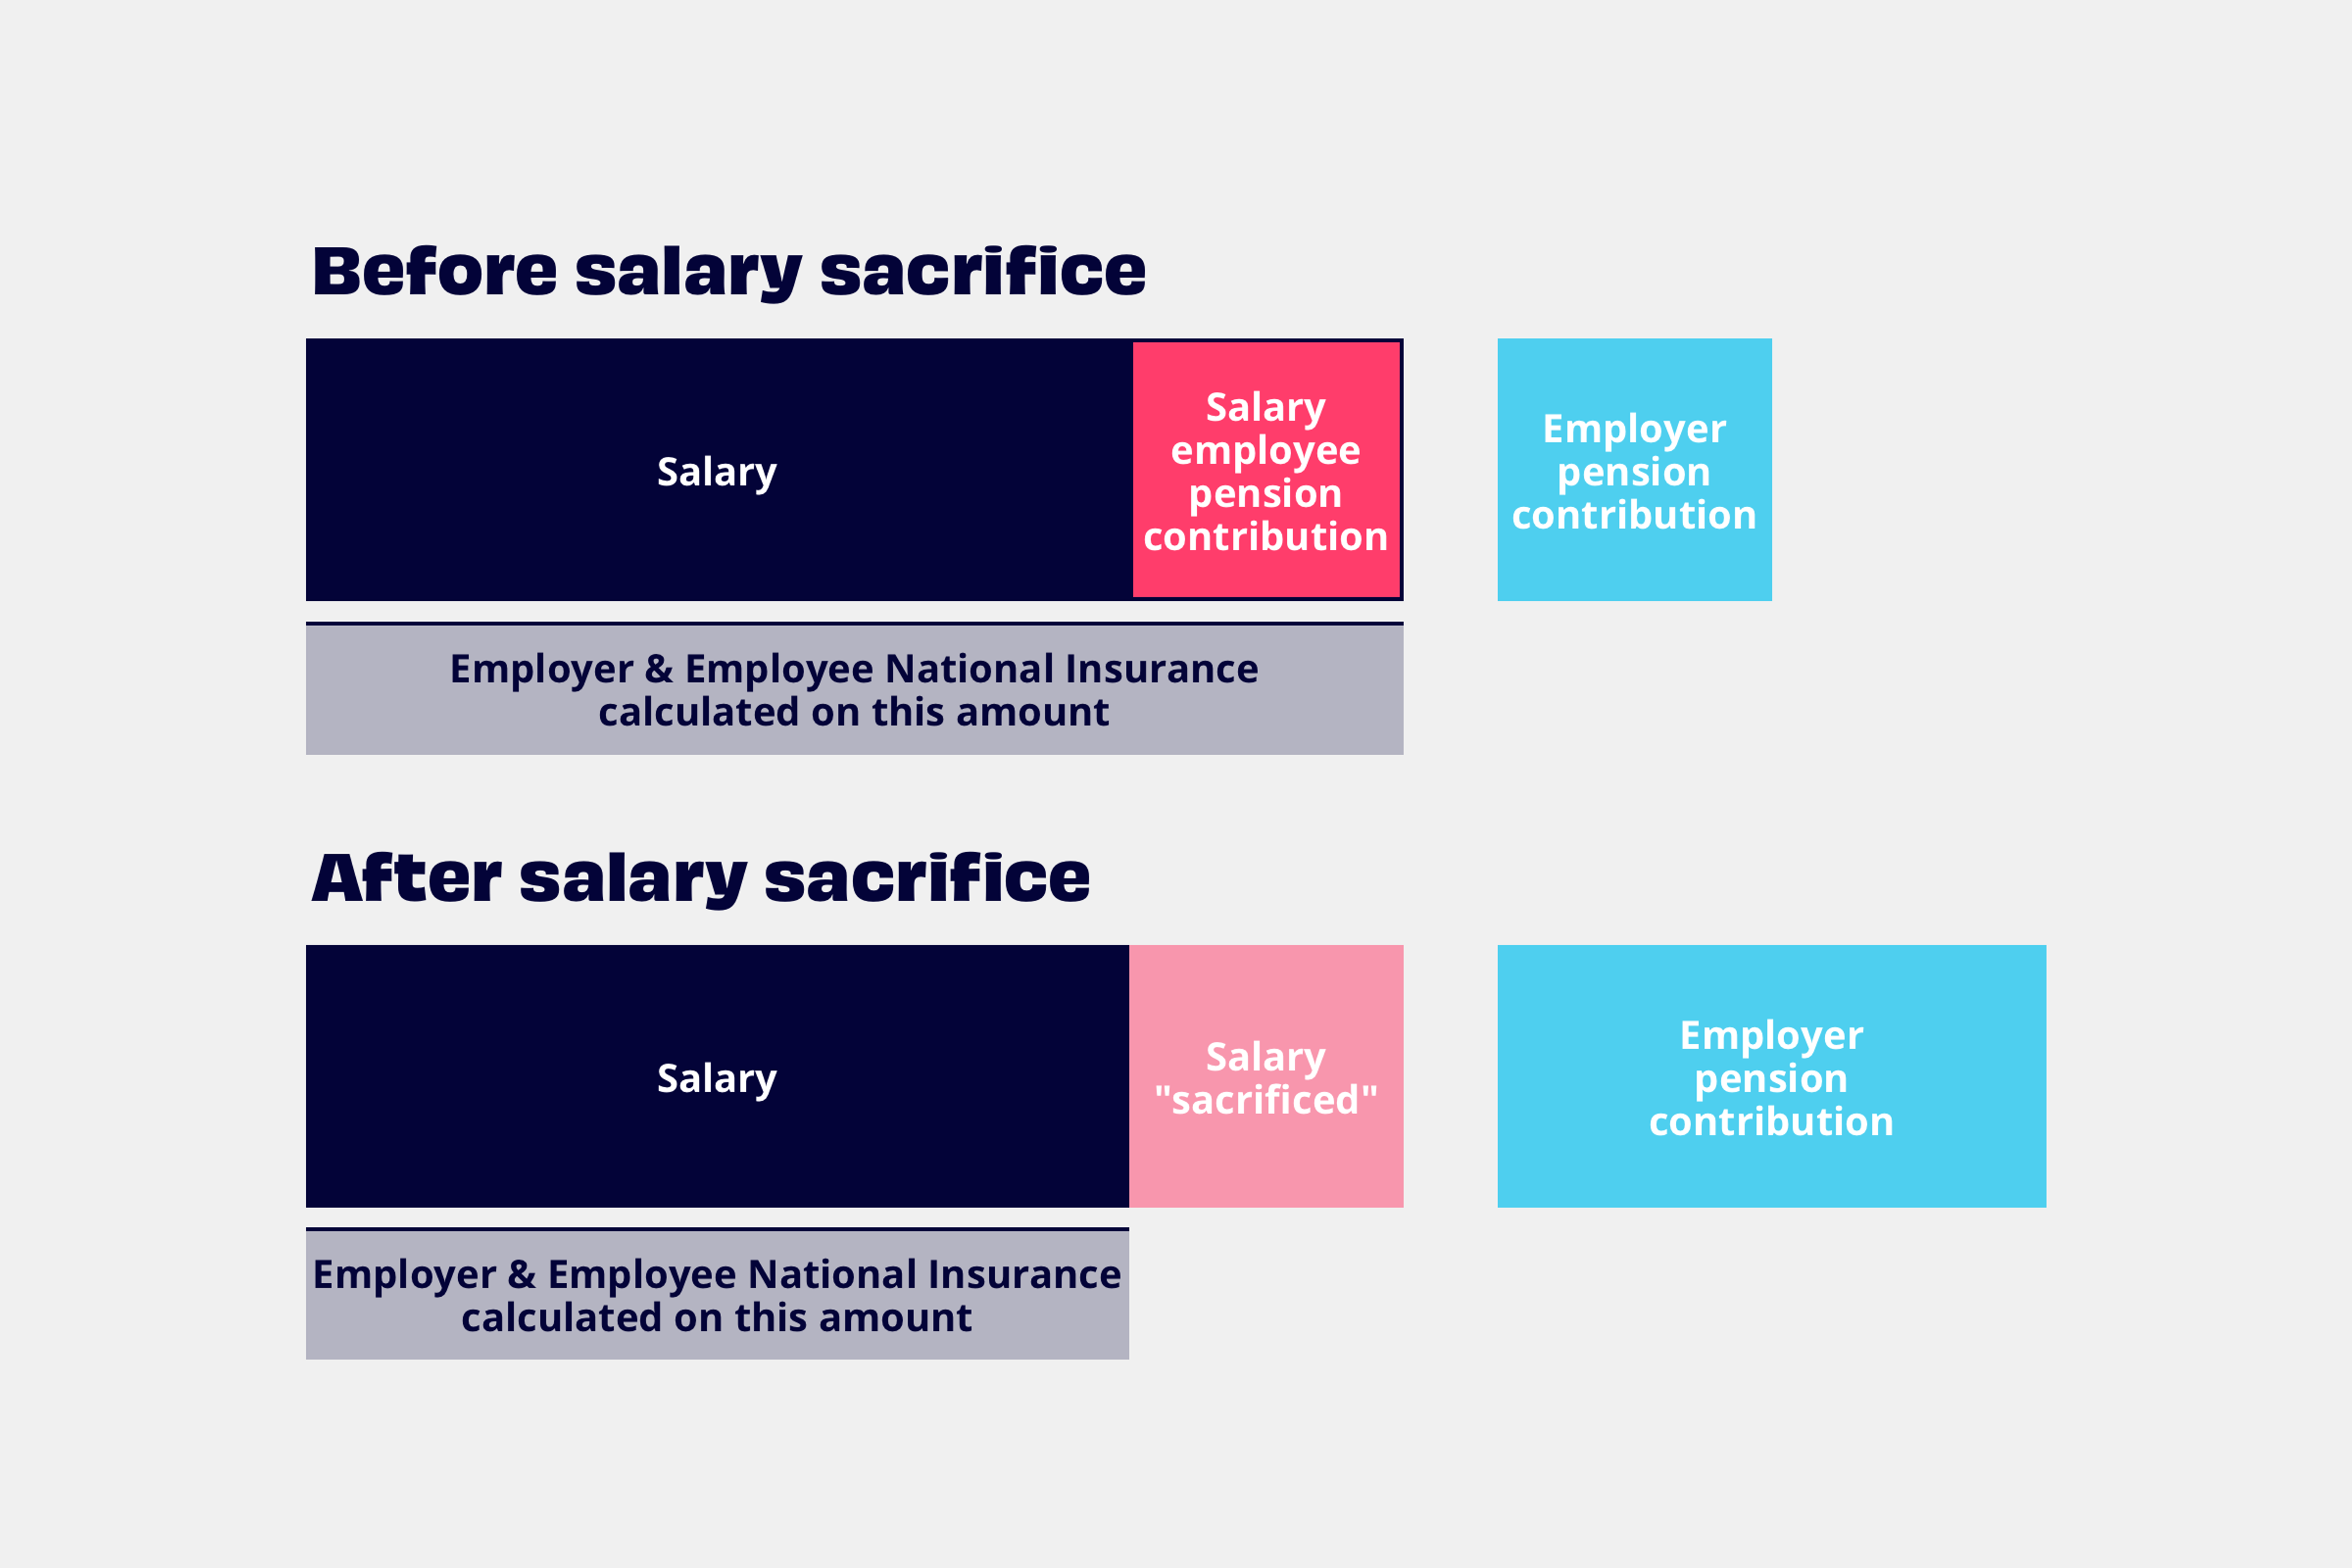 Bar chart showing pension contributions before and after salary sacrifice